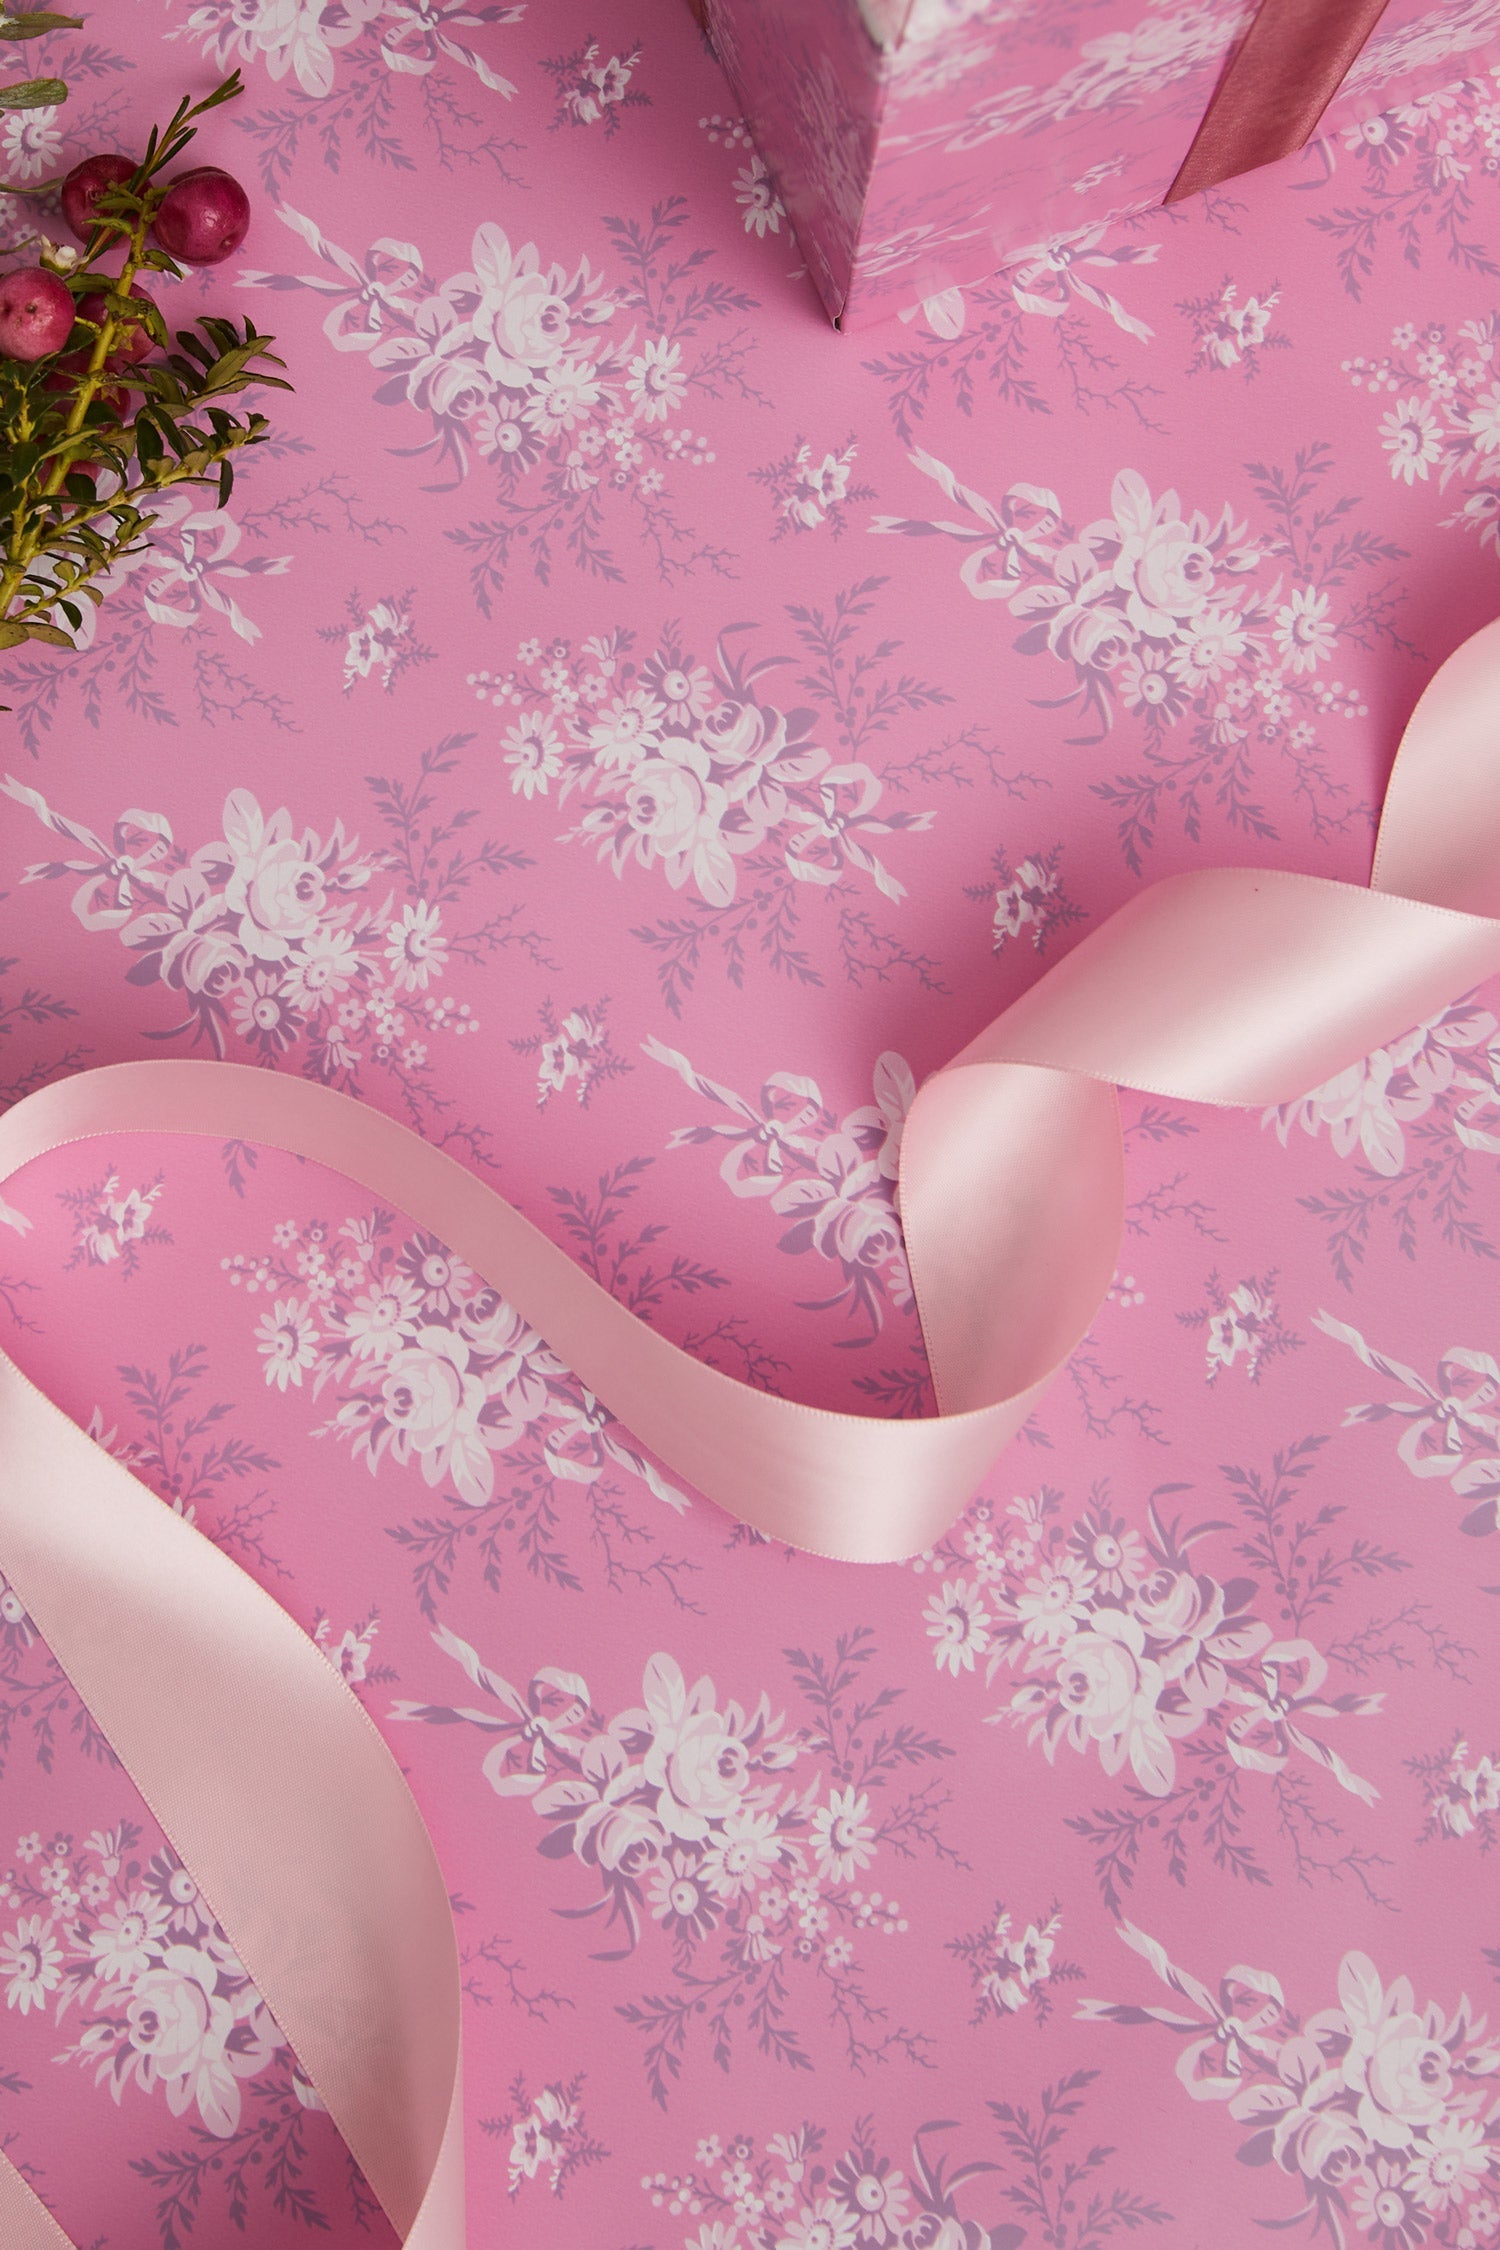 Canary Island Floral Wrapping Paper